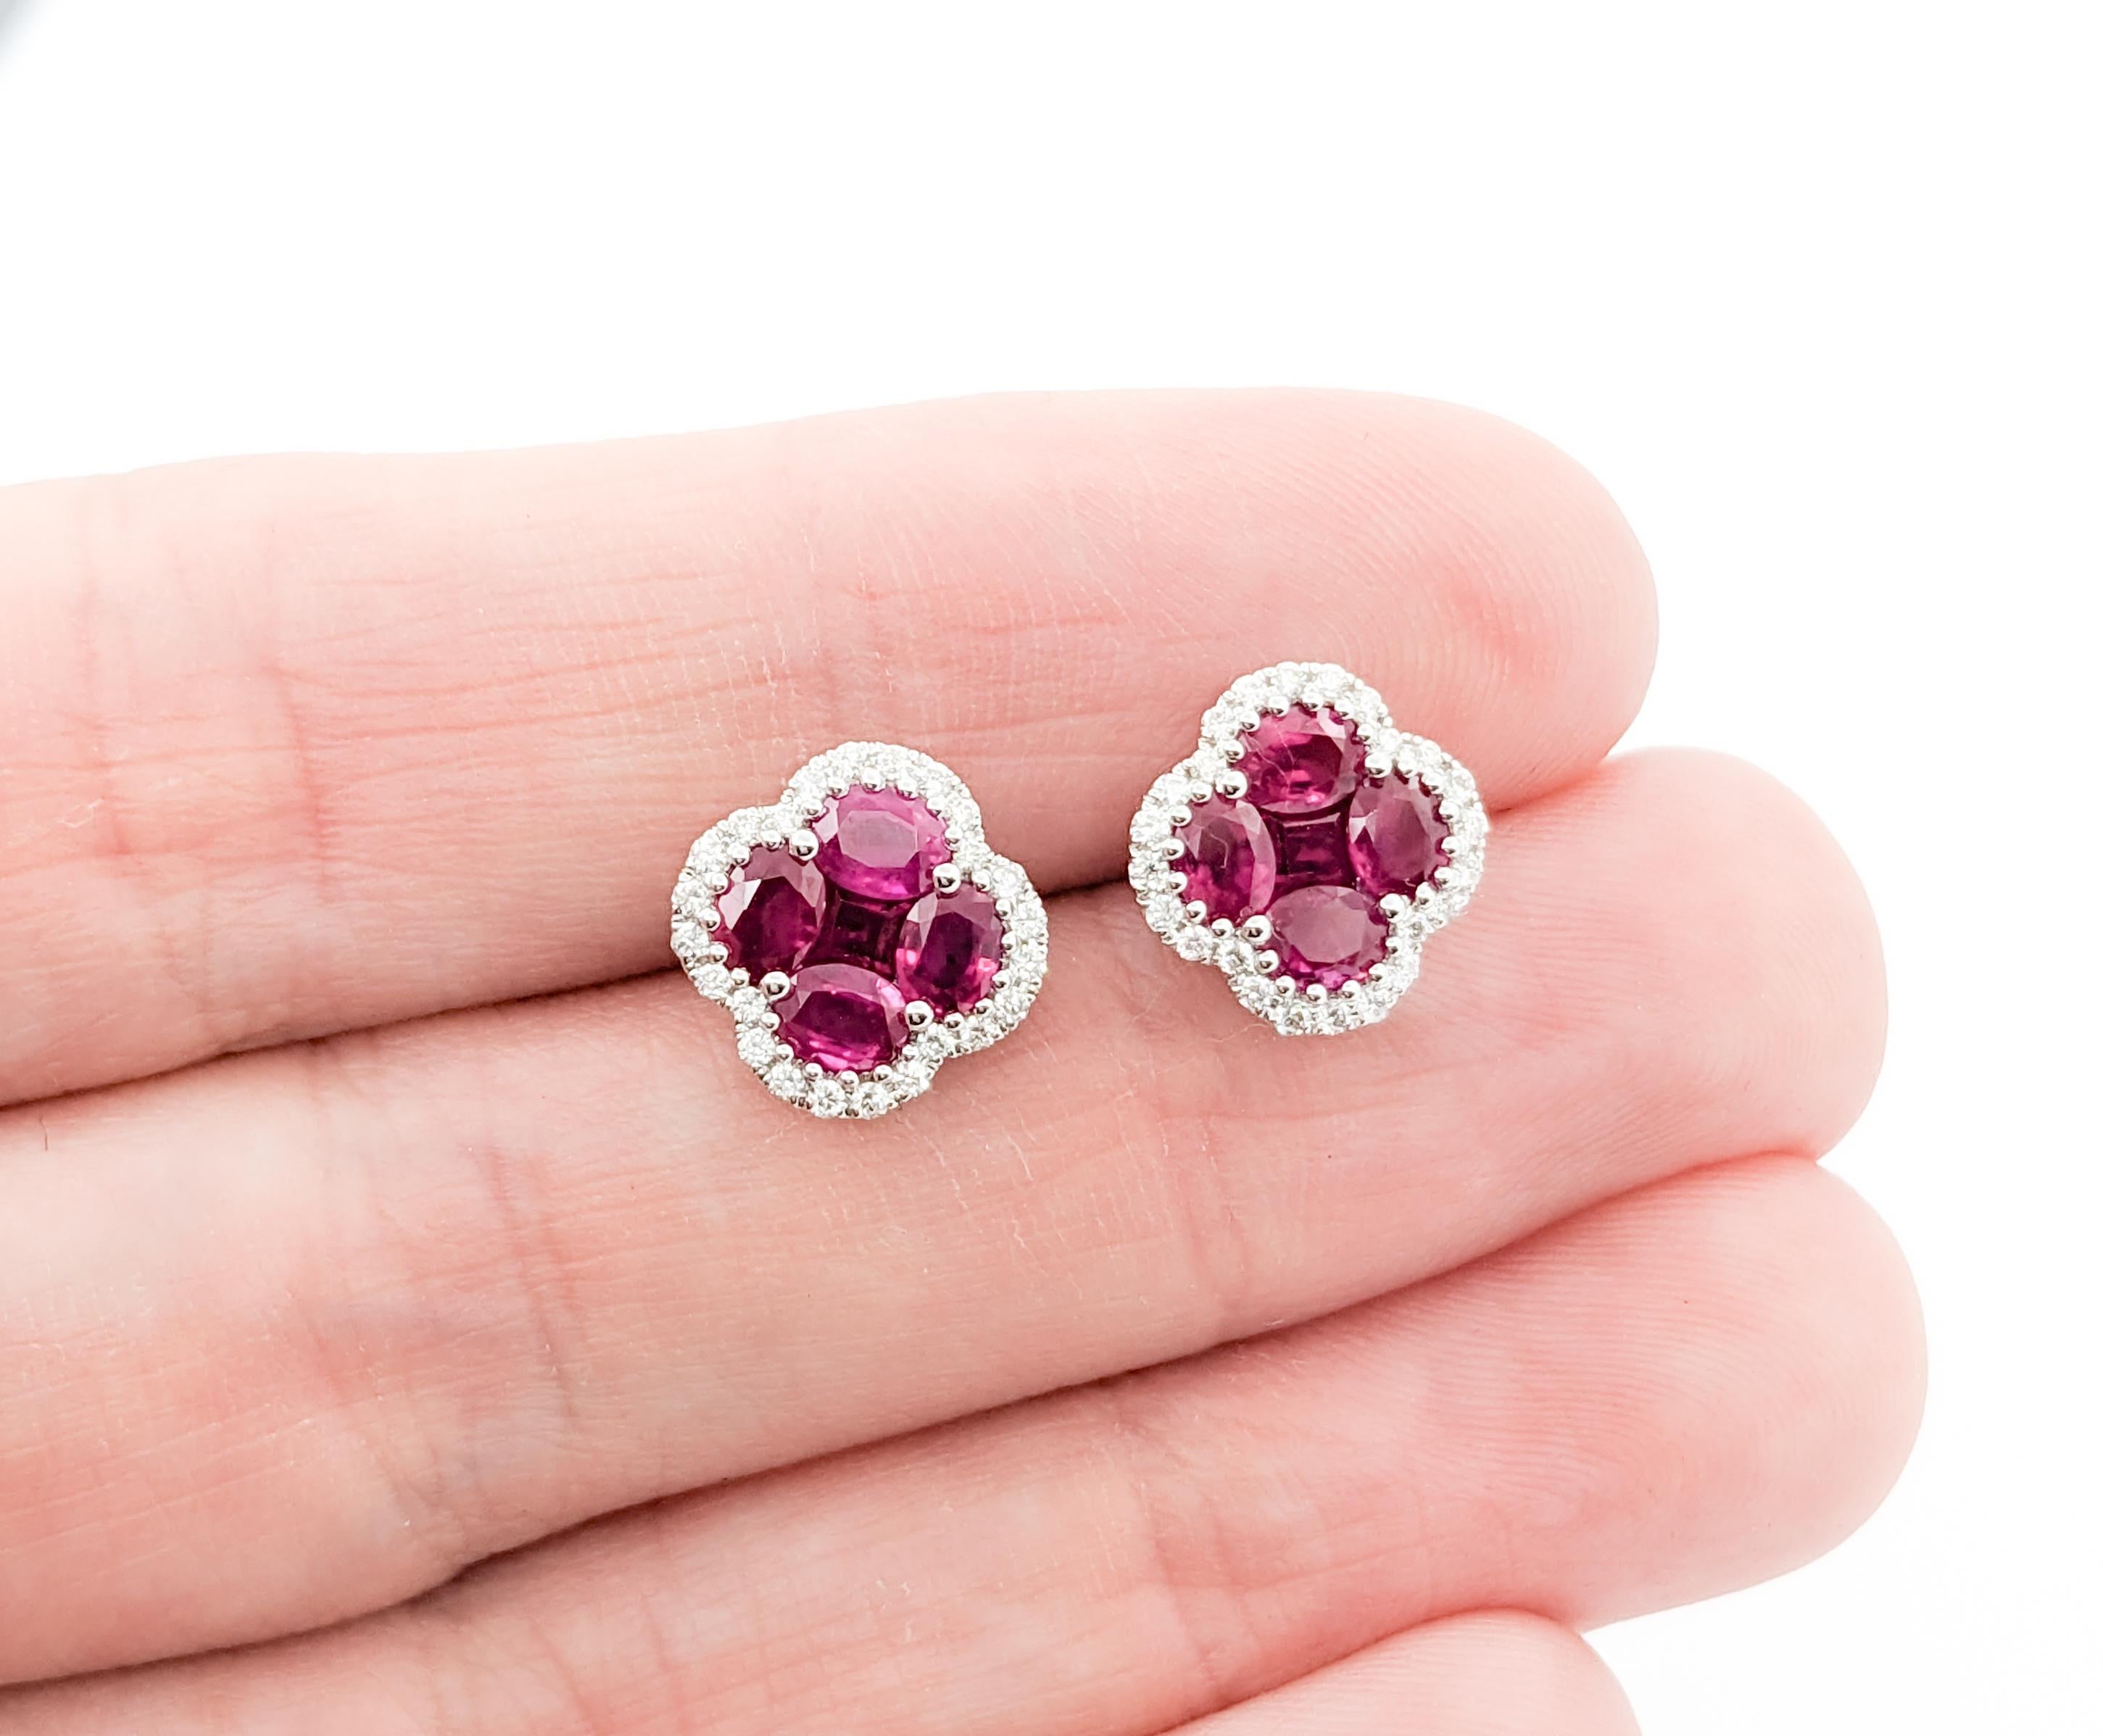 1.60ctw Rubies & Diamond Quatrefoil Stud Earrings In White Gold

Introducing these exquisite gemstone fashion earrings crafted in 14k white gold, featuring .23ctw of diamonds and 1.60ctw of rubies in a stunning quatrefoil stud design. The diamonds